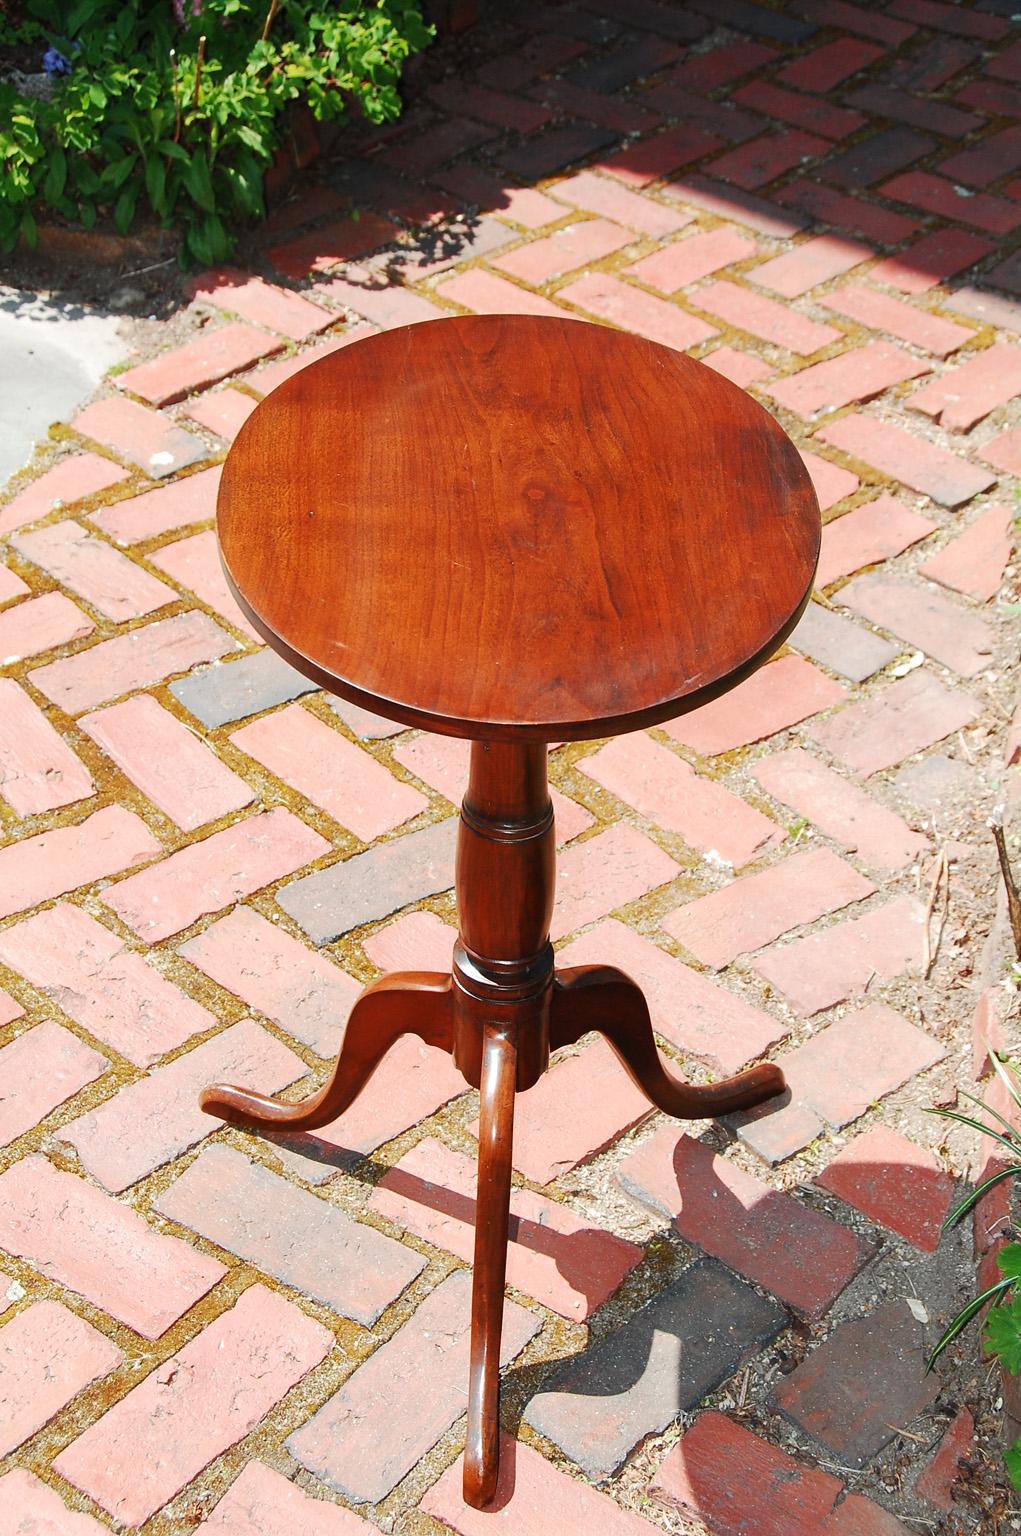 American Chippendale 18th century oval wine table in walnut. This lovely table has initials impressed on the carrying block under the top: S P, which we believe to be Samuel Phippen of Salem, Massachusetts (1744-98). The turned tapered stem ends